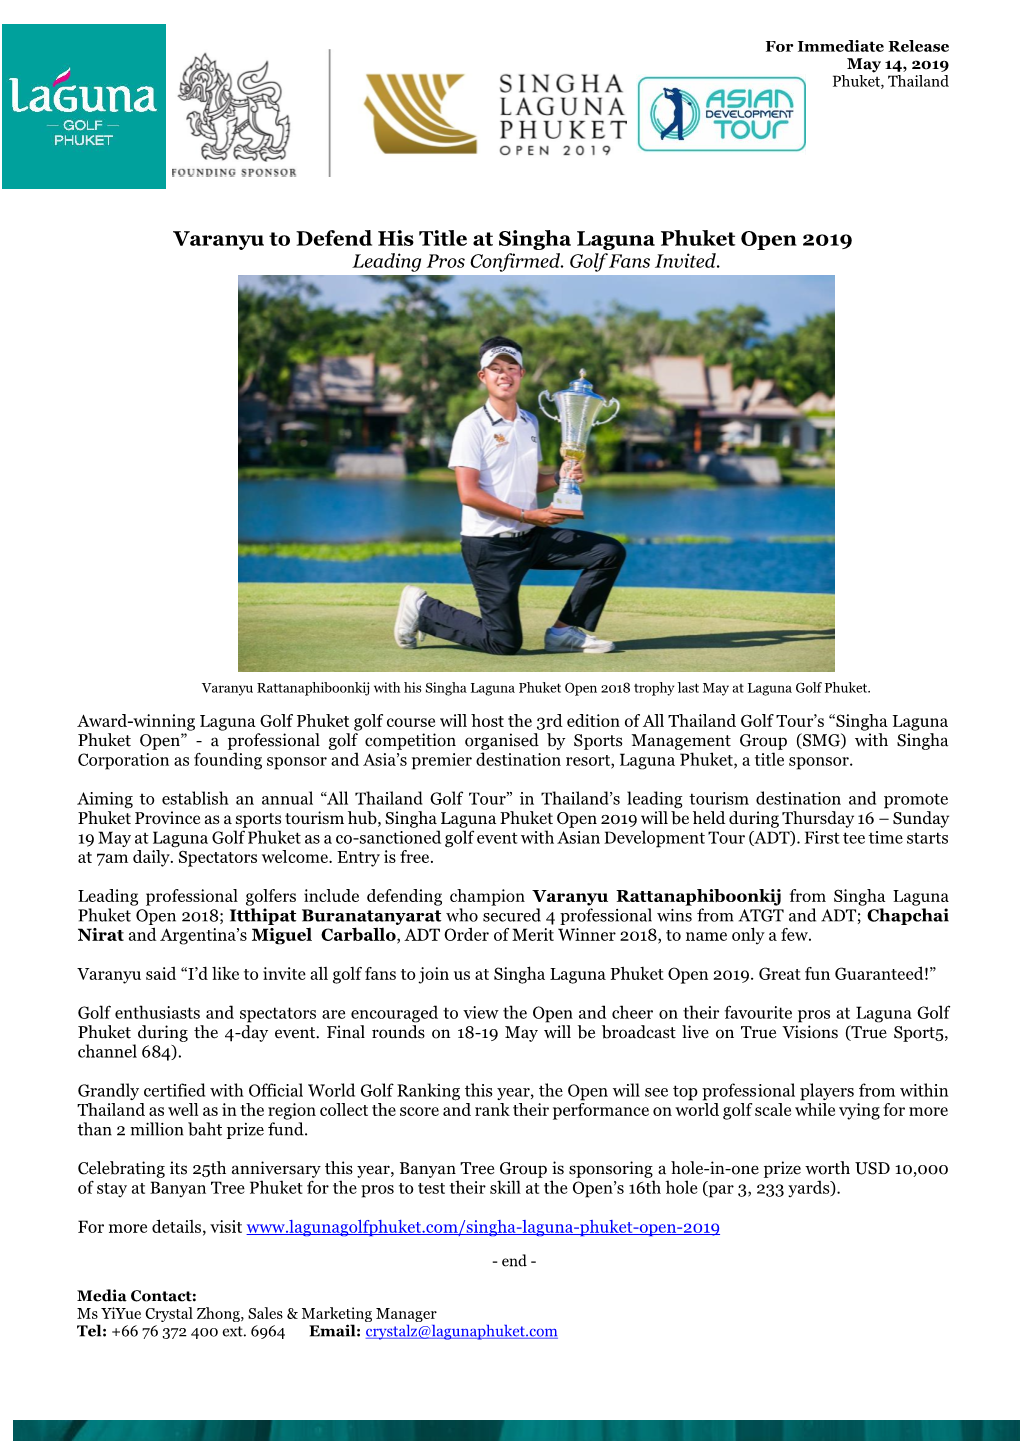 Varanyu to Defend His Title at Singha Laguna Phuket Open 2019 Leading Pros Confirmed